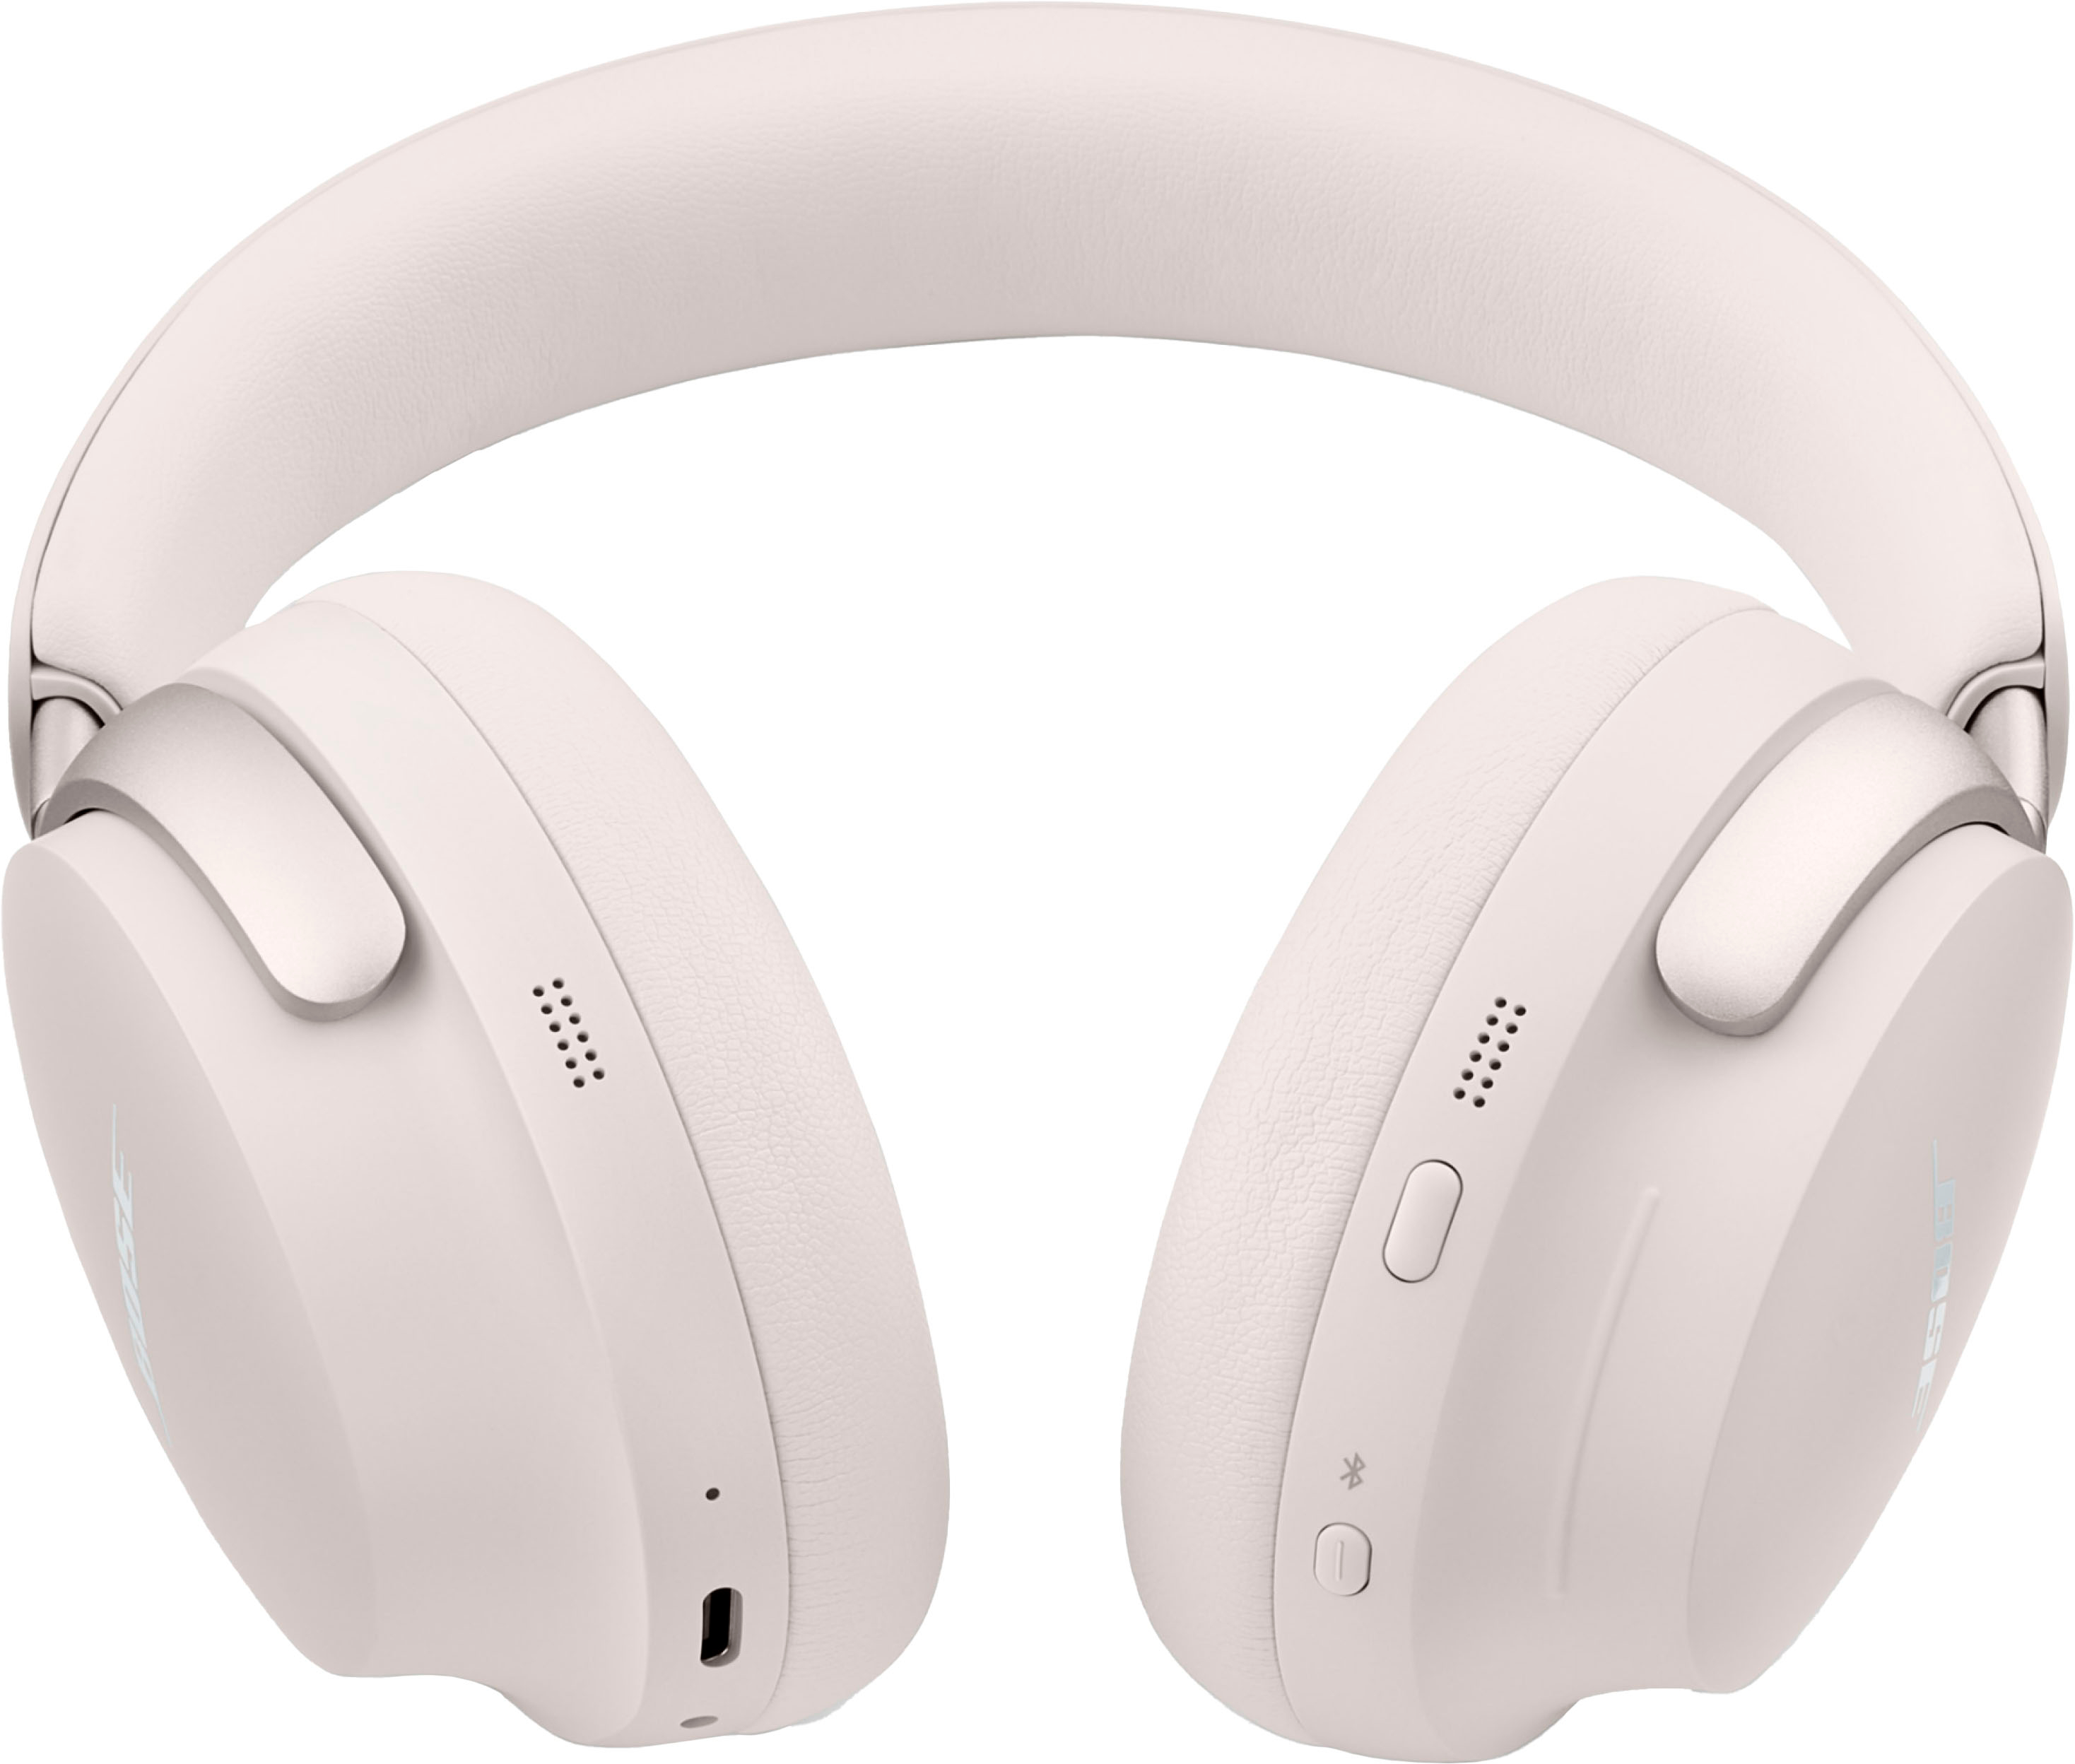 Bose QuietComfort Ultra Wireless Buy Noise 880066-0200 Cancelling White Best Headphones Smoke Over-the-Ear 